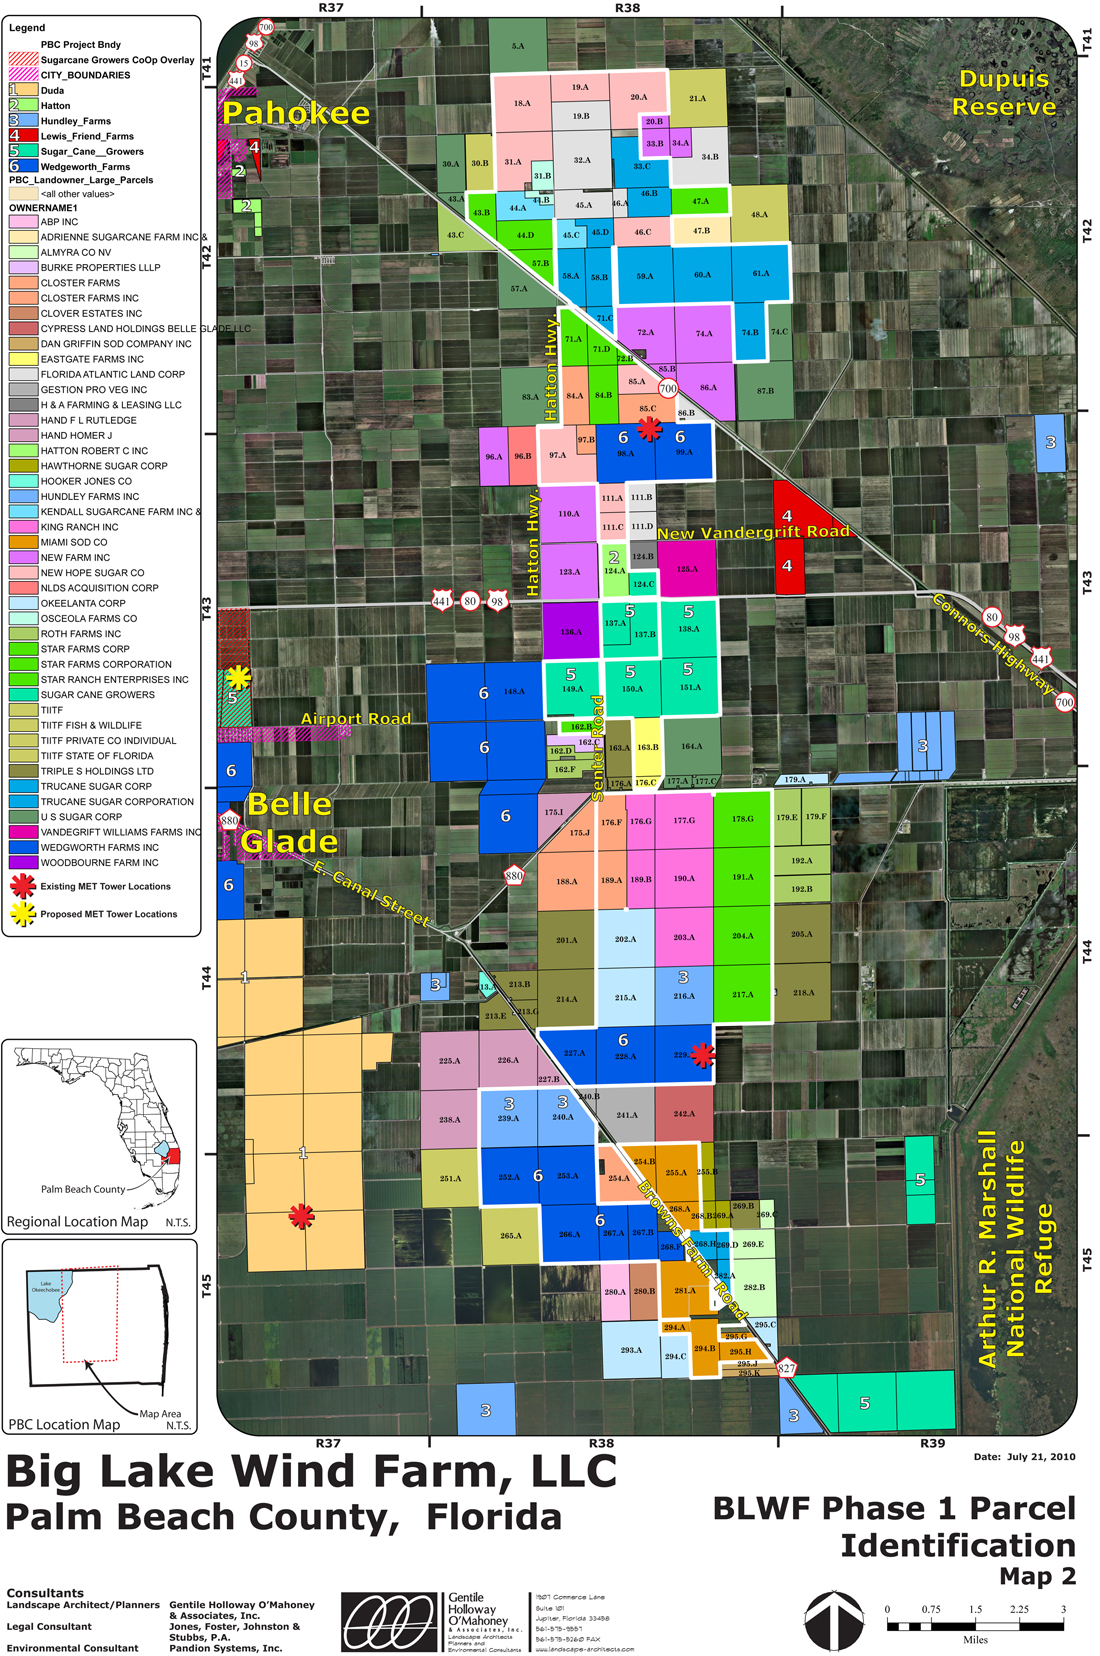 Sugarland Wind Phase 1 Parcel Identification Map.jpg